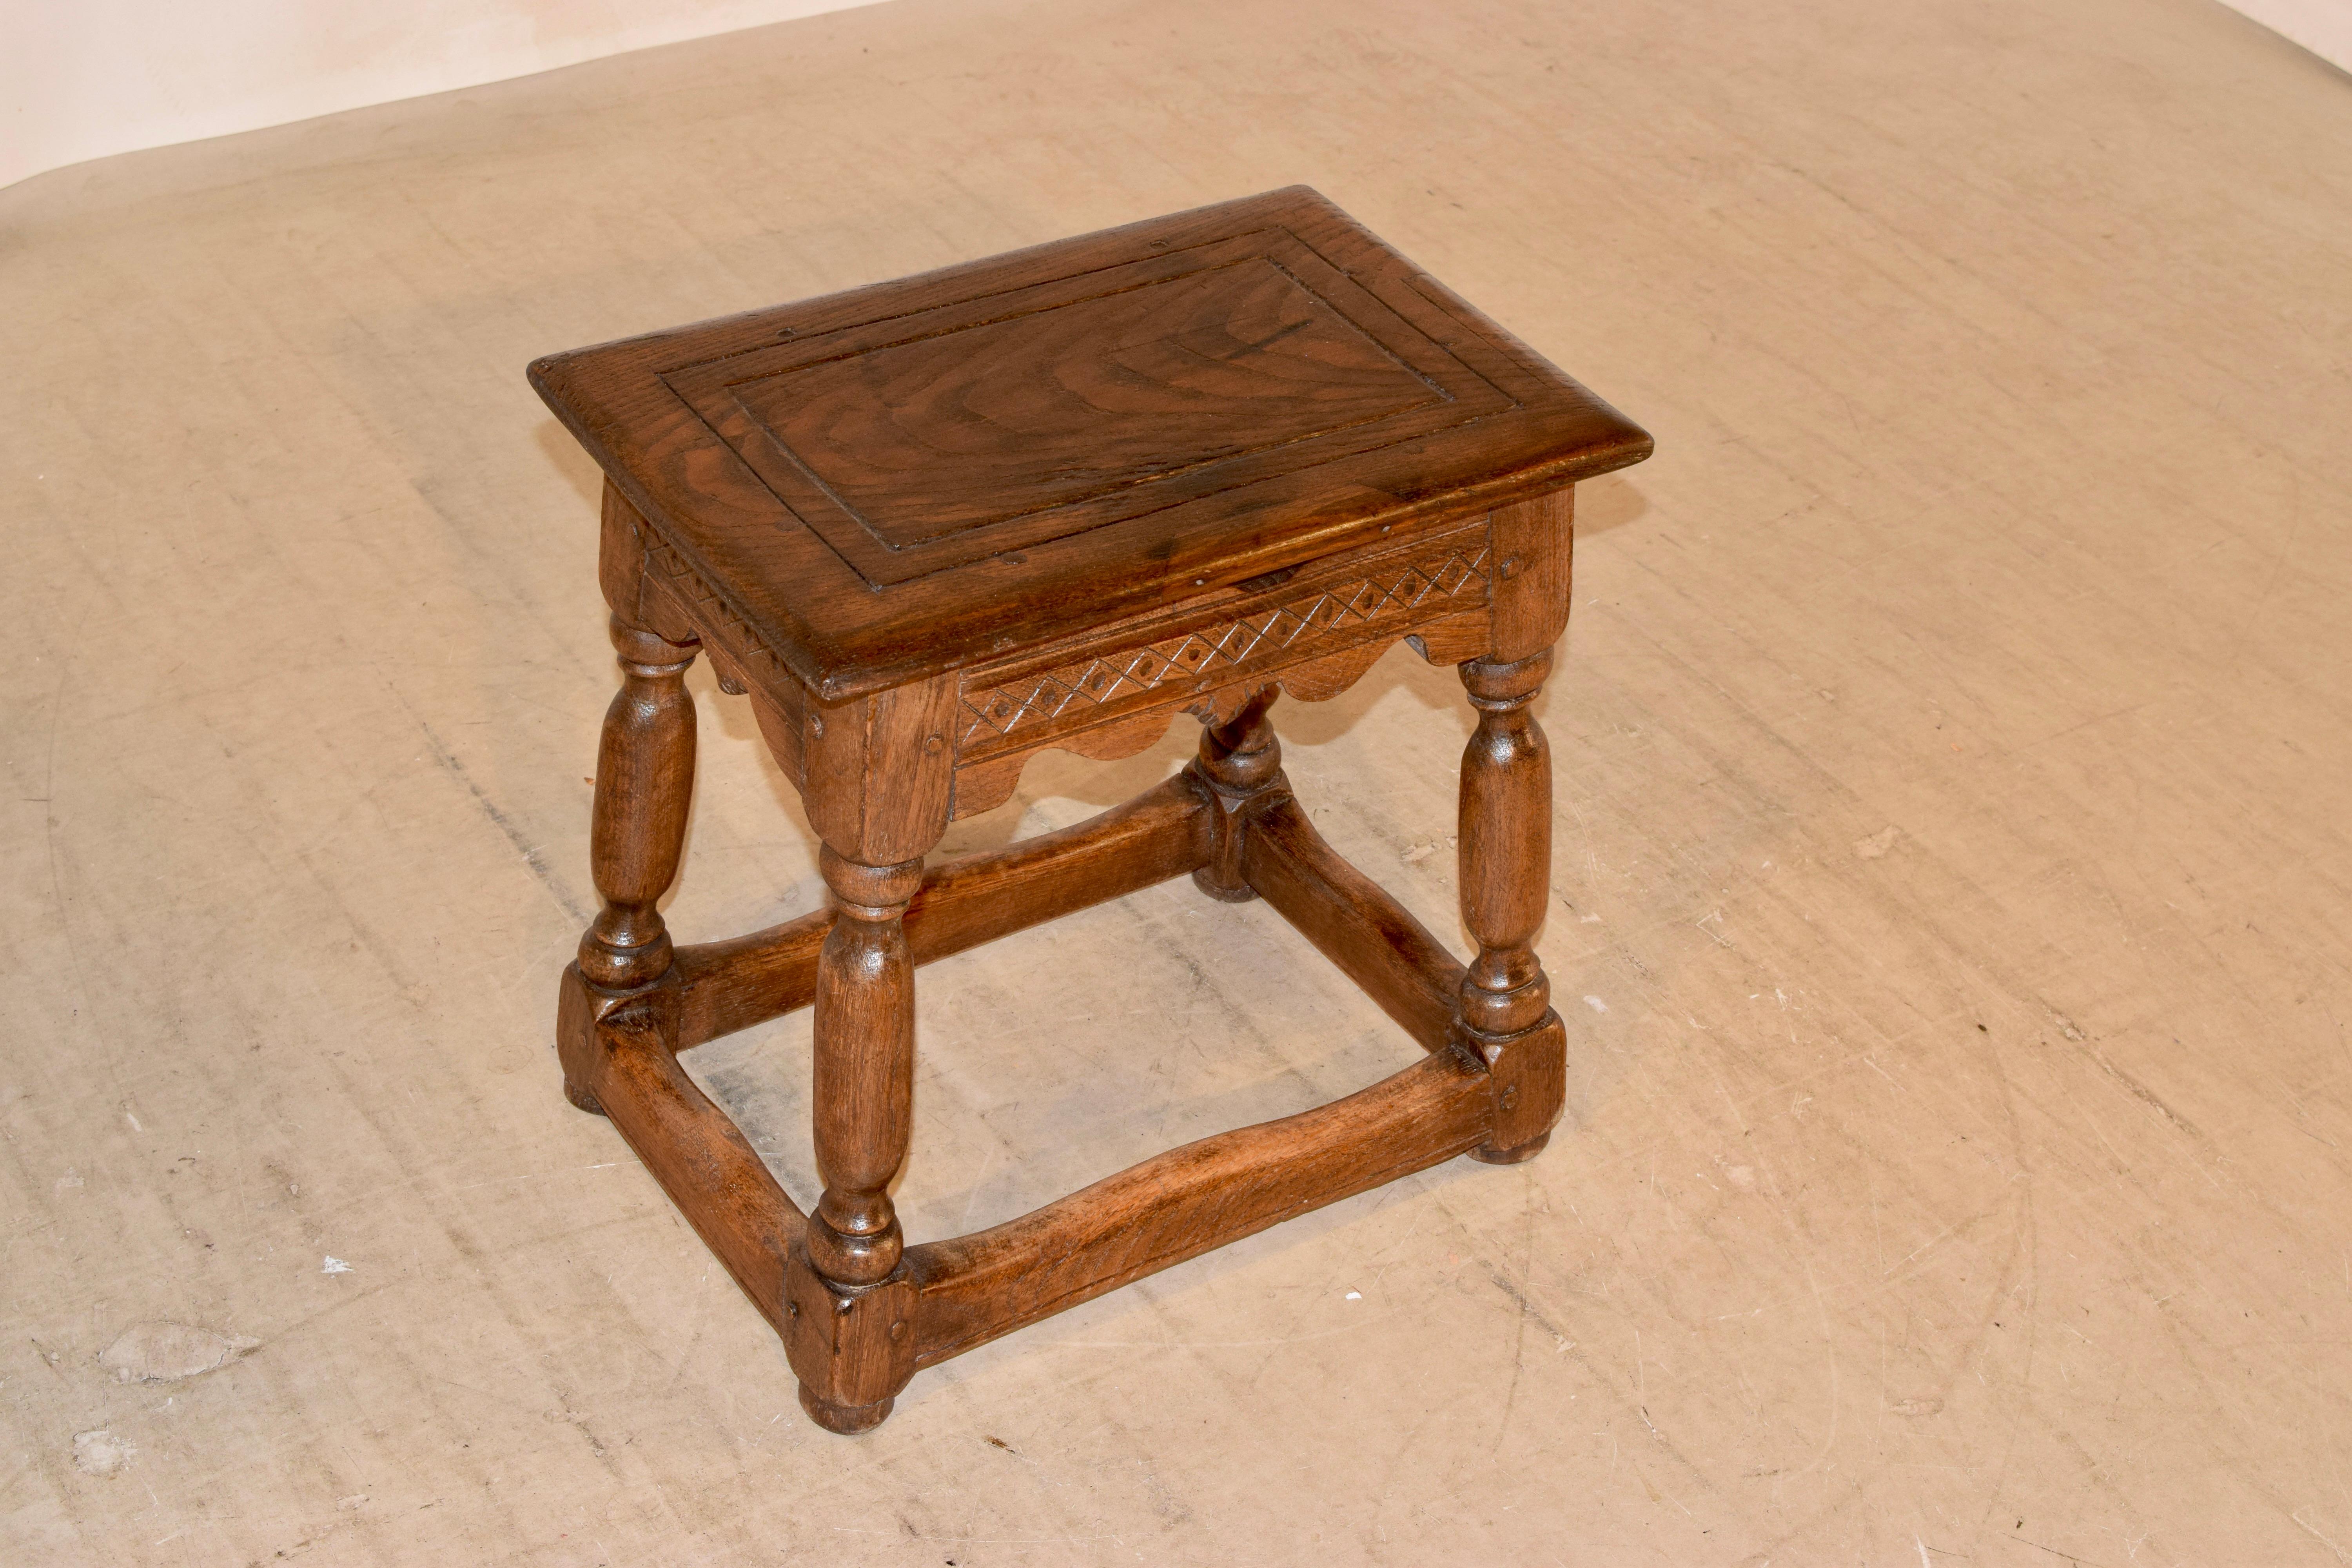 Early 19th century elm stool from France with a wonderfully grained top which has routed paneled decoration. The apron is simply elegant with hand scalloping and carved decoration and the stool is supported on hand turned and splayed legs, joined by